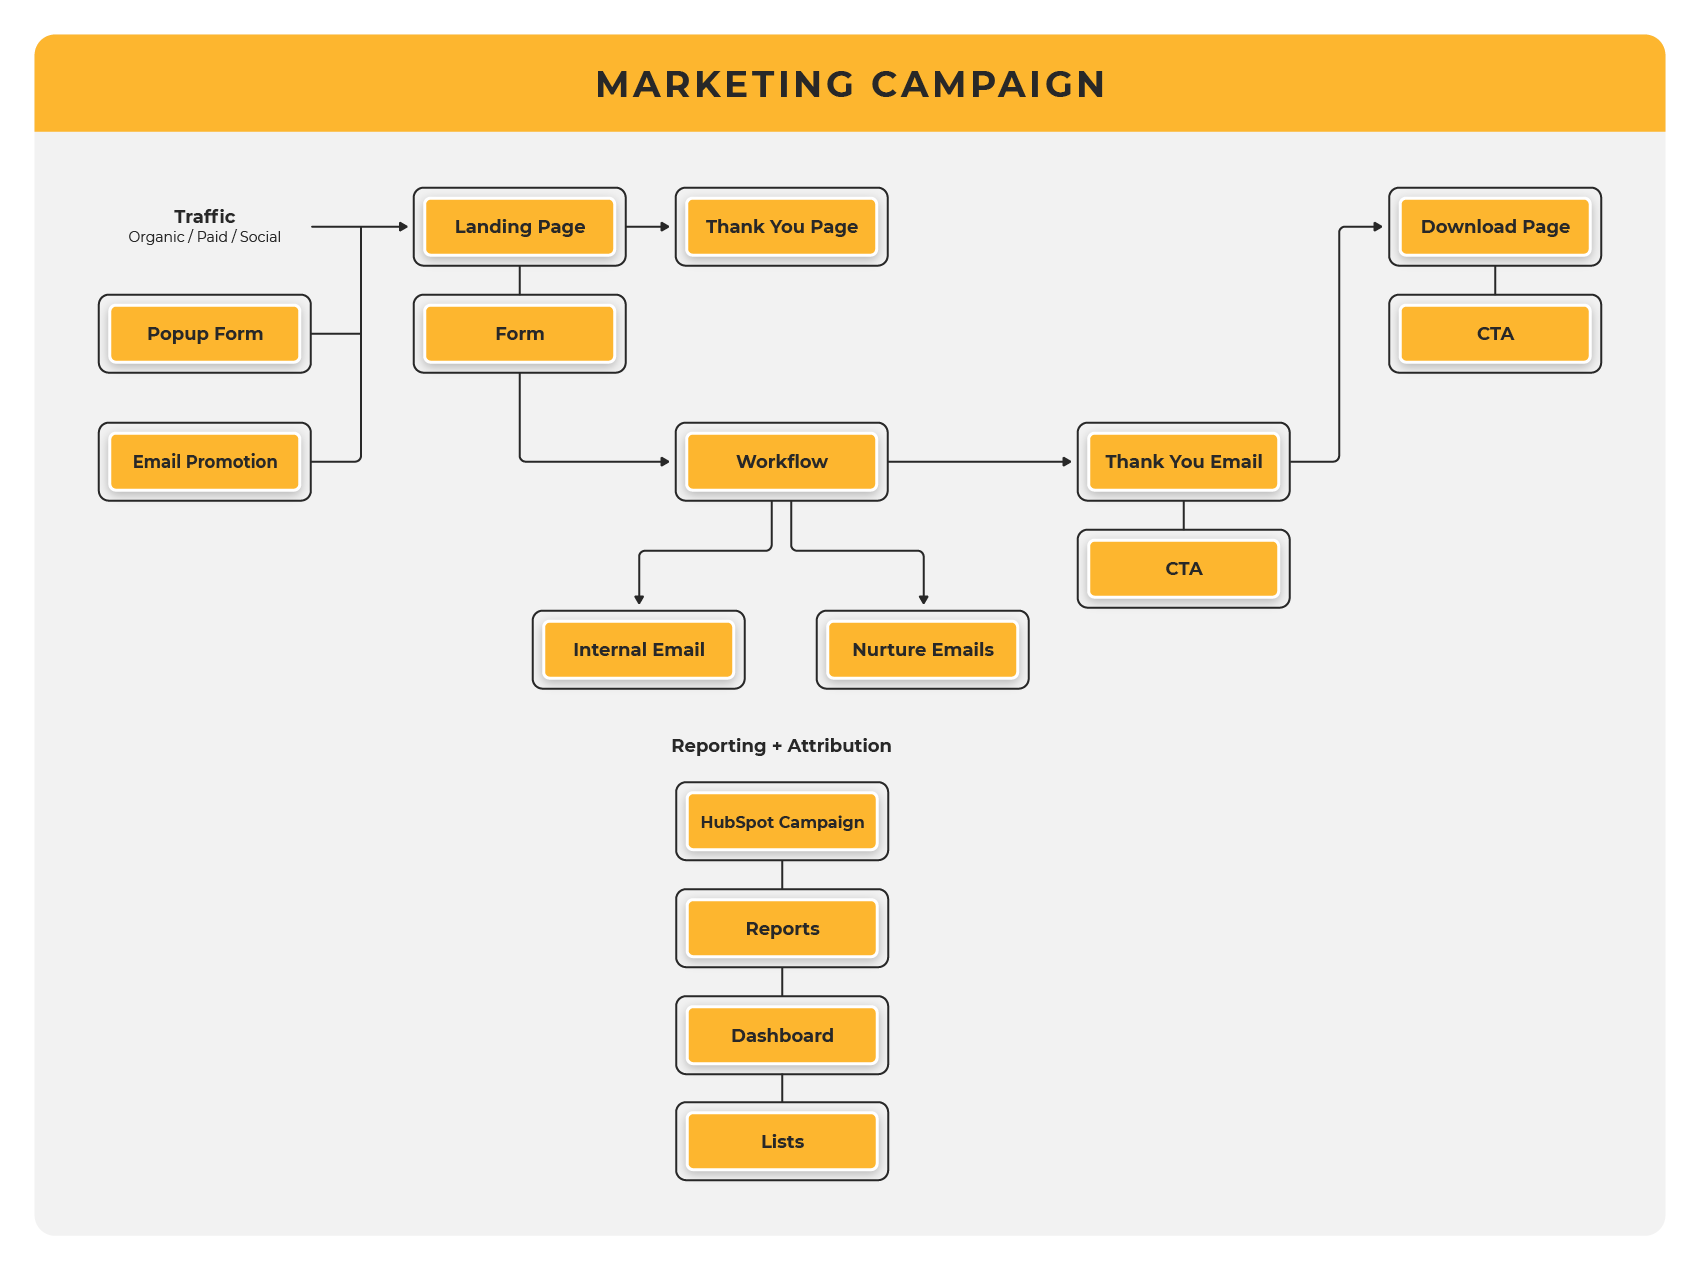 What's Included in the HubSpot Marketing Campaign Implementation